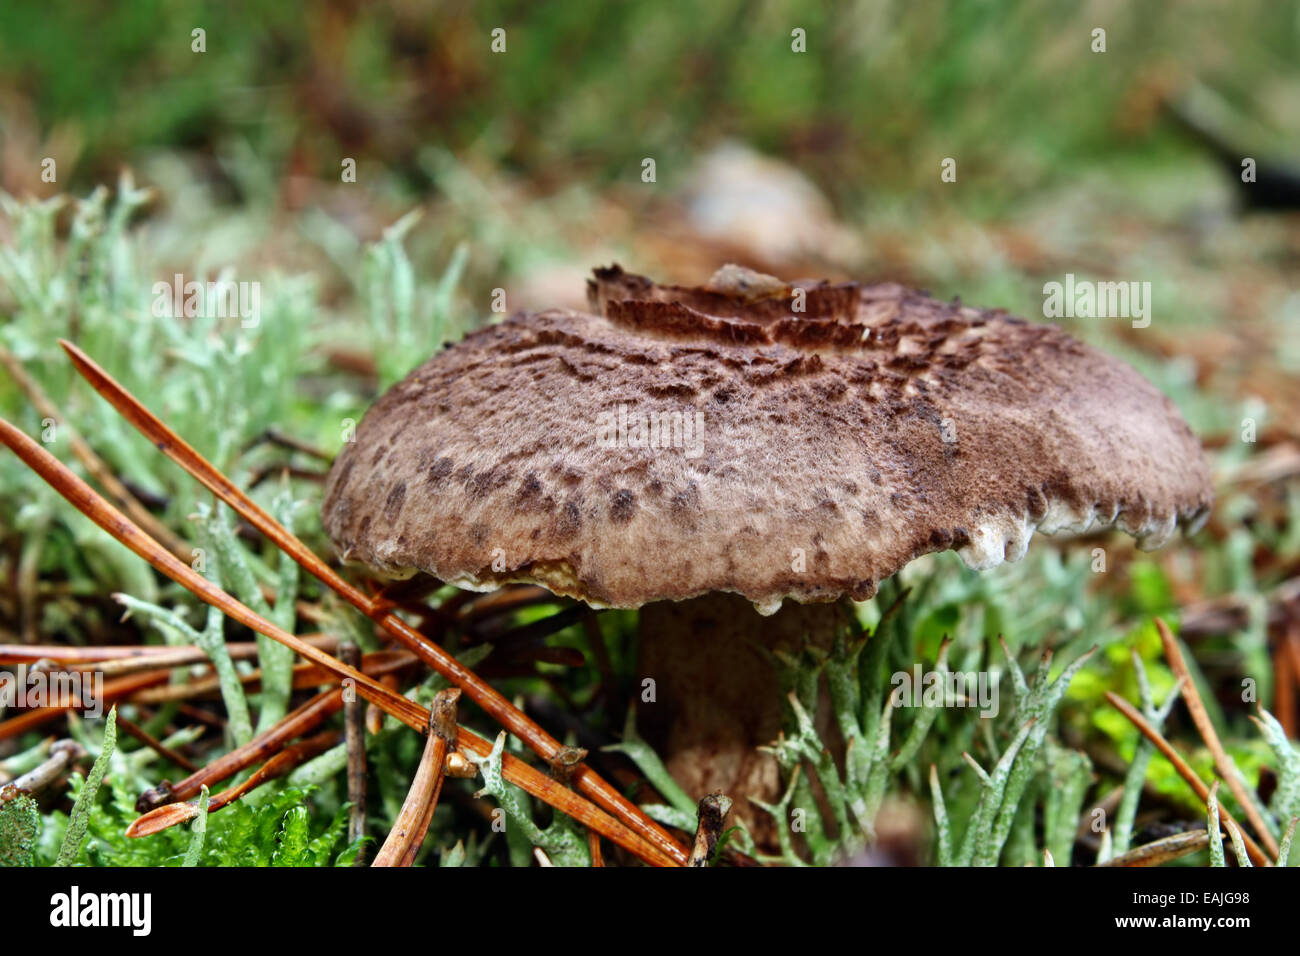 Brown mushrooms sarcodon growing in the forest Stock Photo